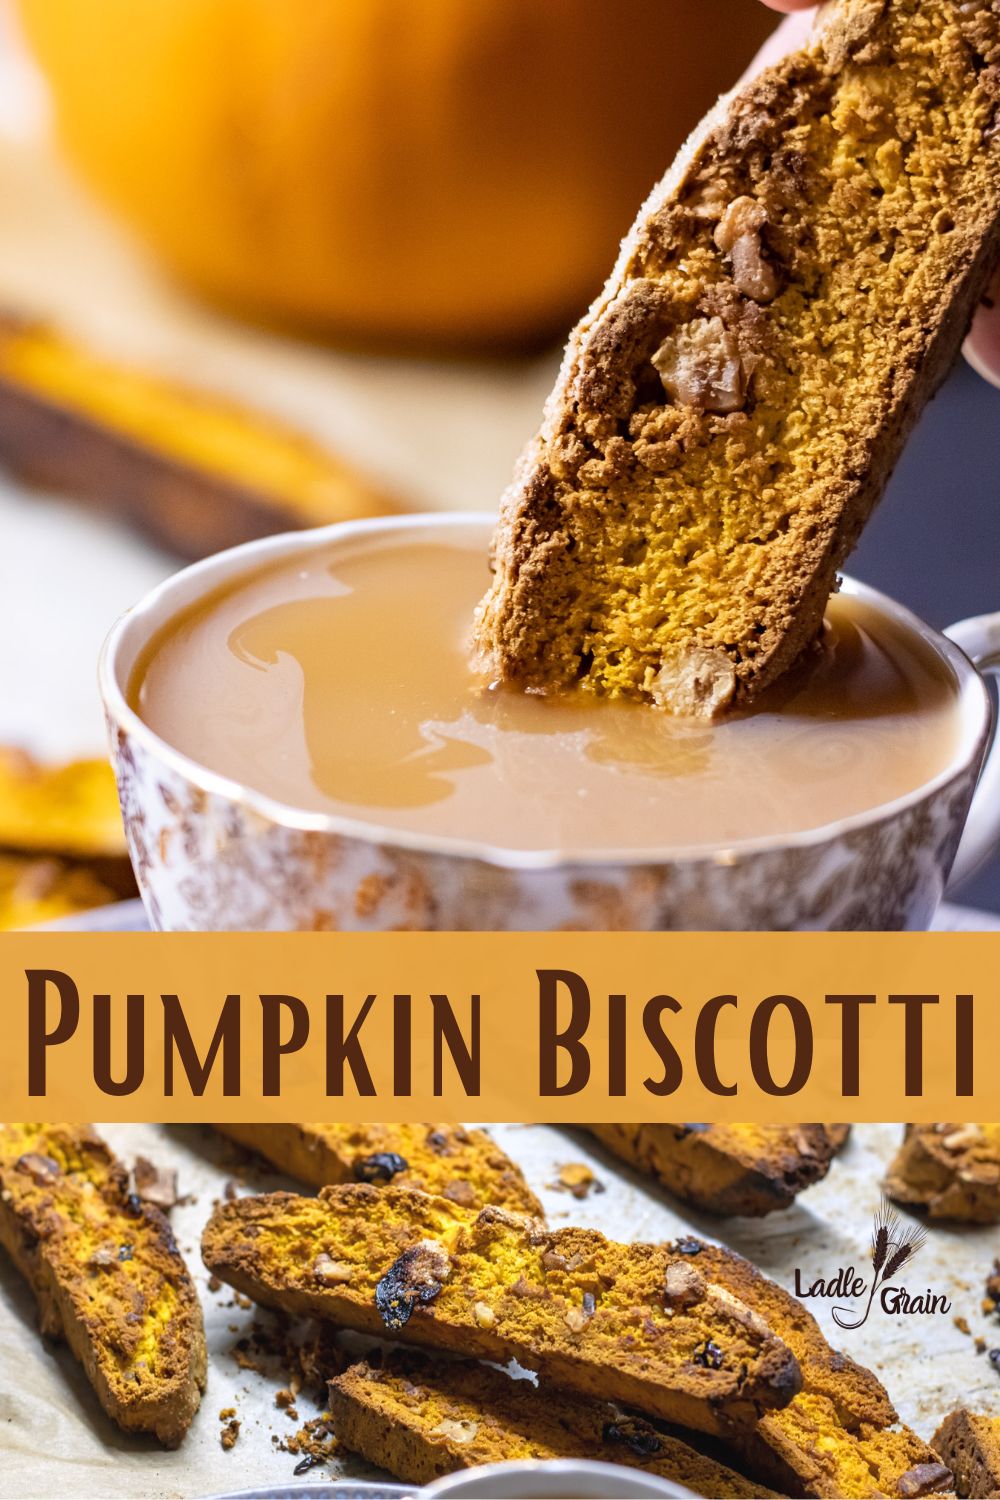 Pumpkin biscotti dunked into a cup of tea with a few on parchment below.